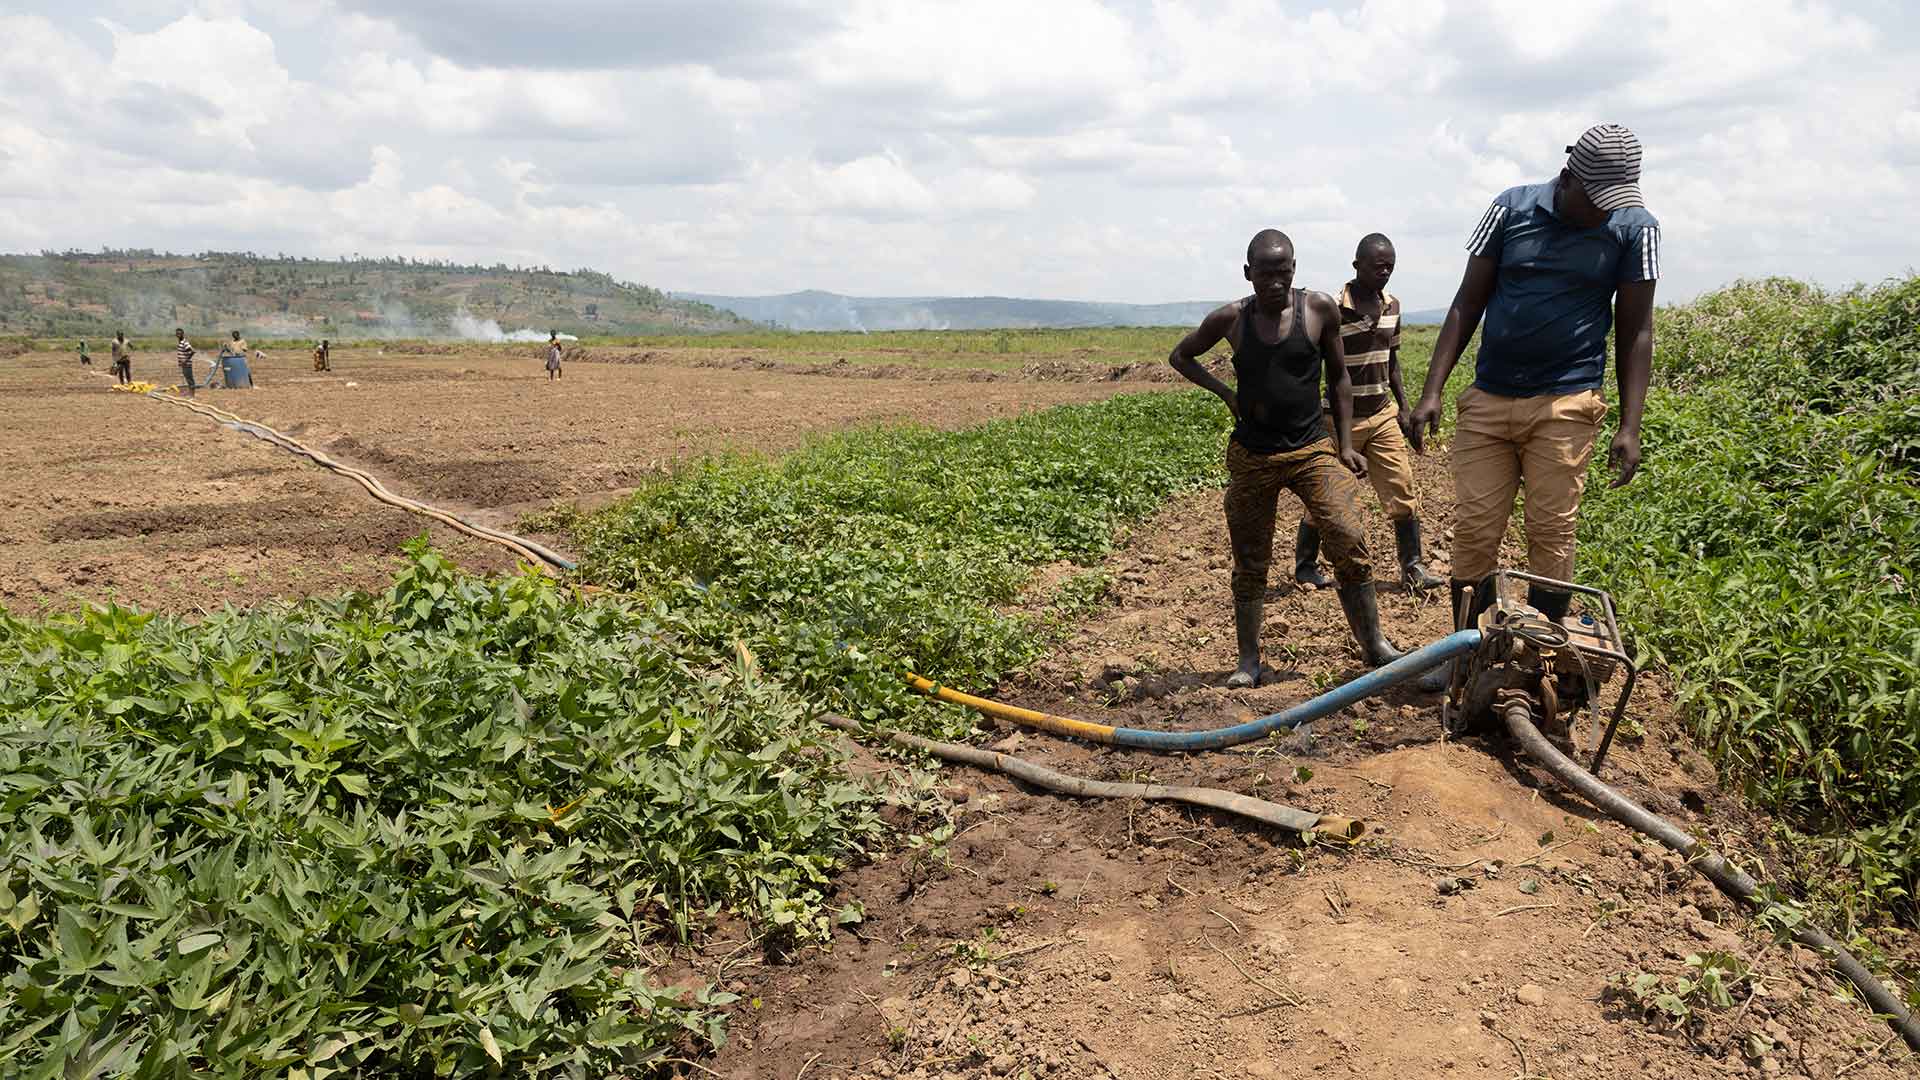 People setting up hoses in field